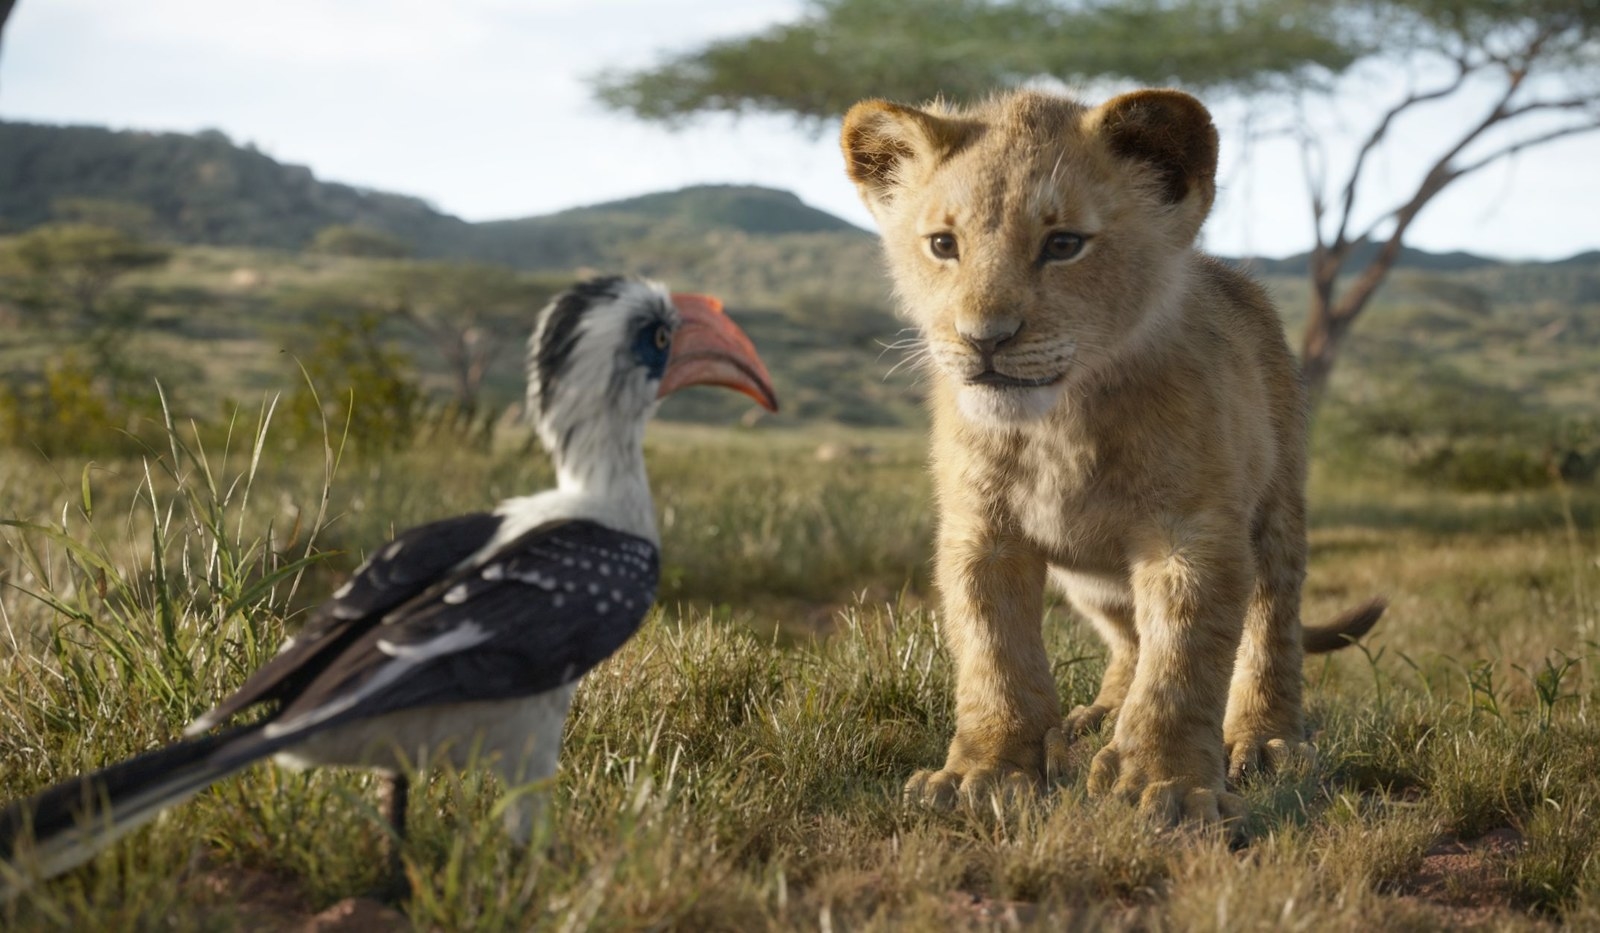 The Lion King And Avengers Endgame Make Box Office History For